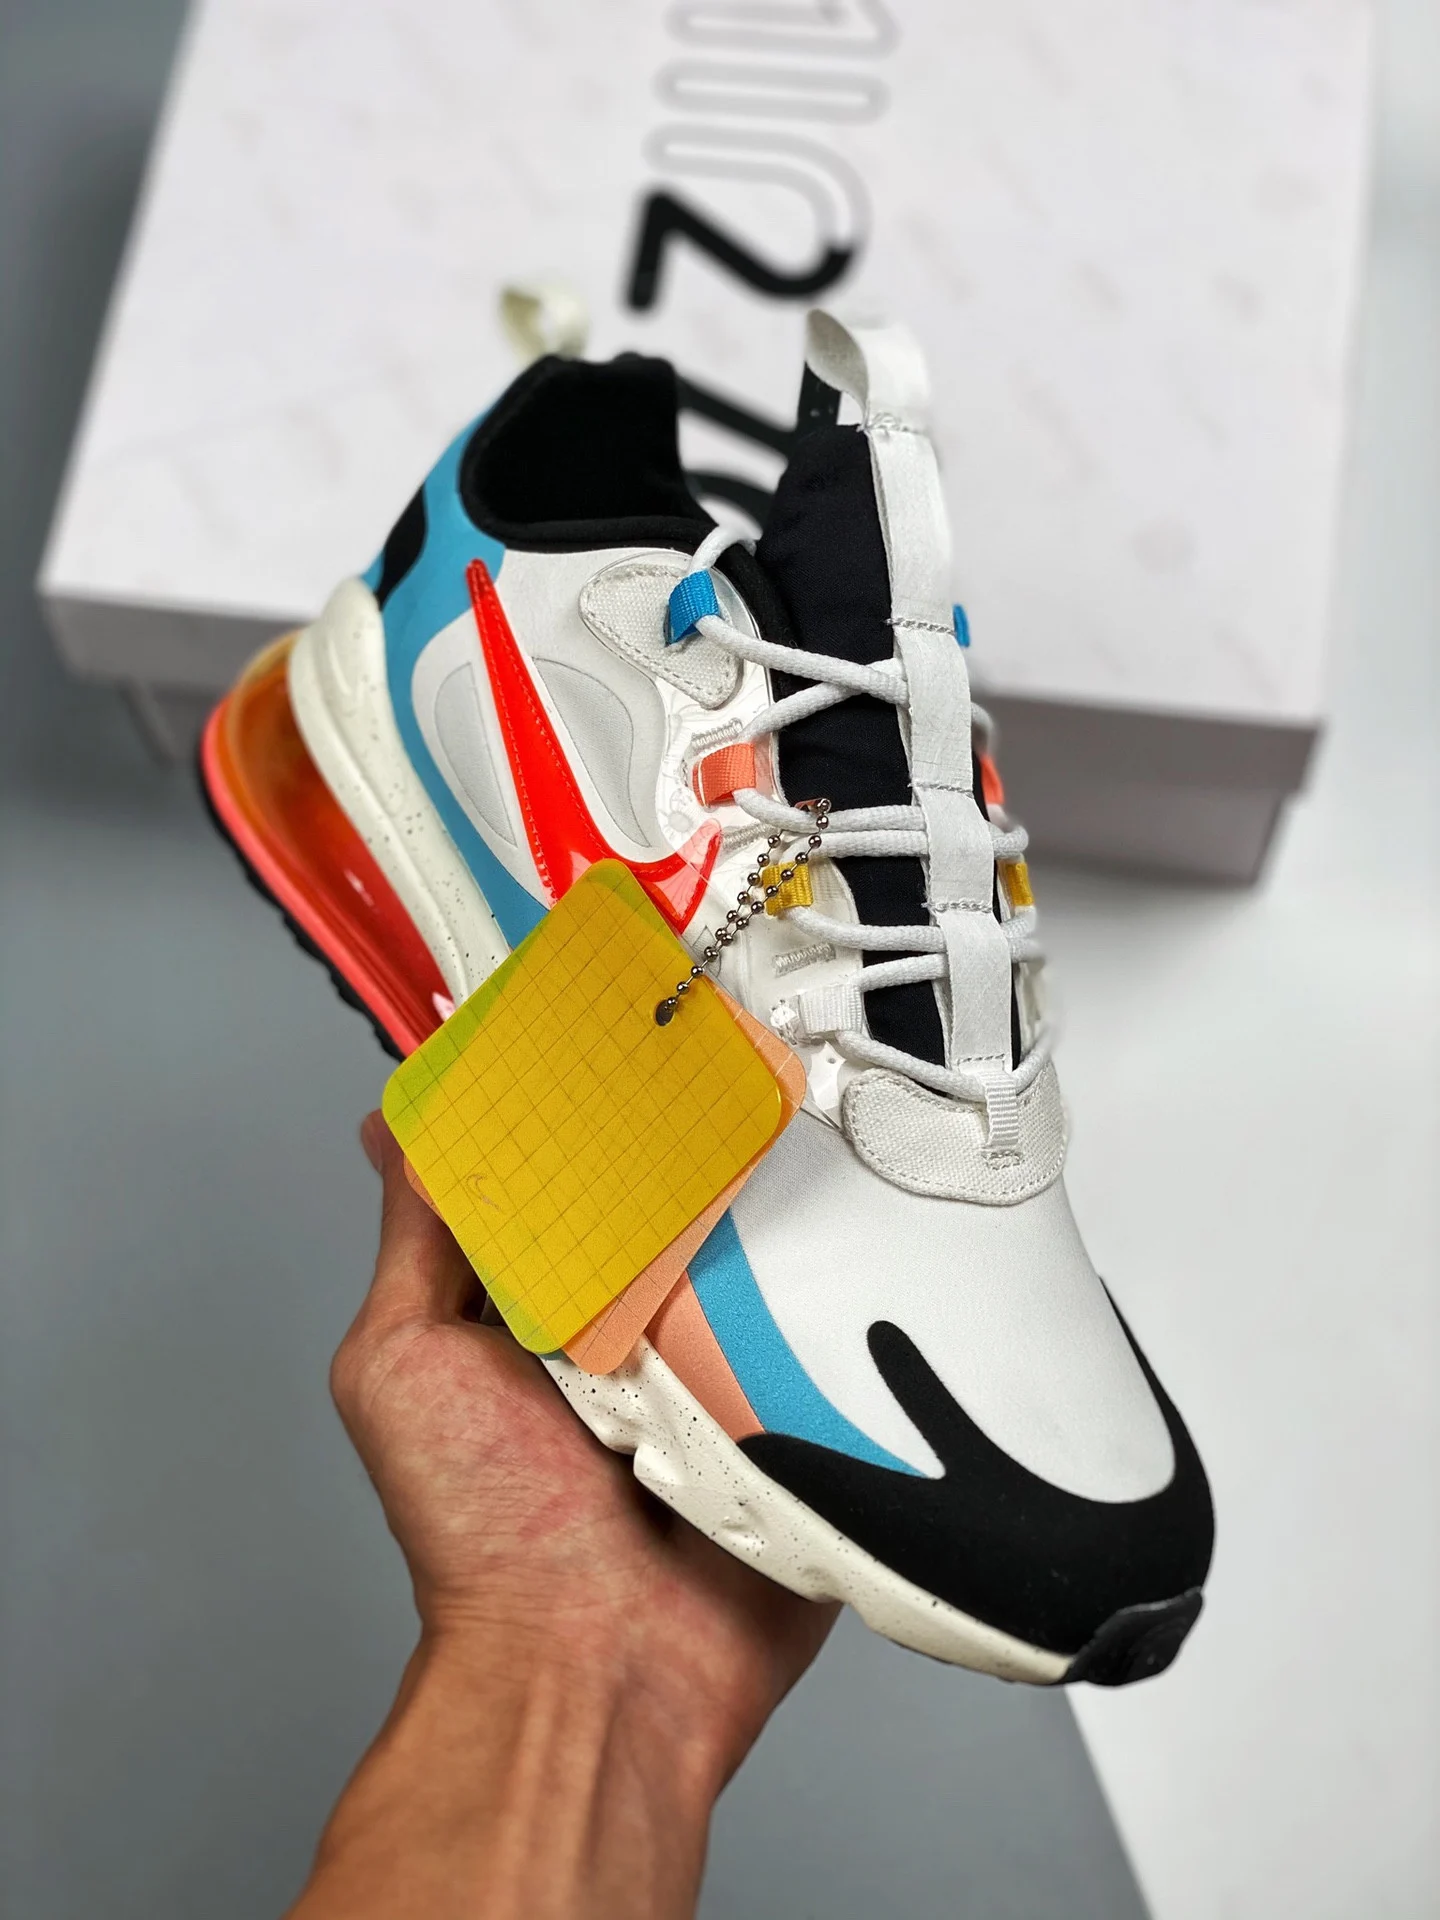 Nike Air Max 270 React The Future is in the Air DD8498-161 For Sale